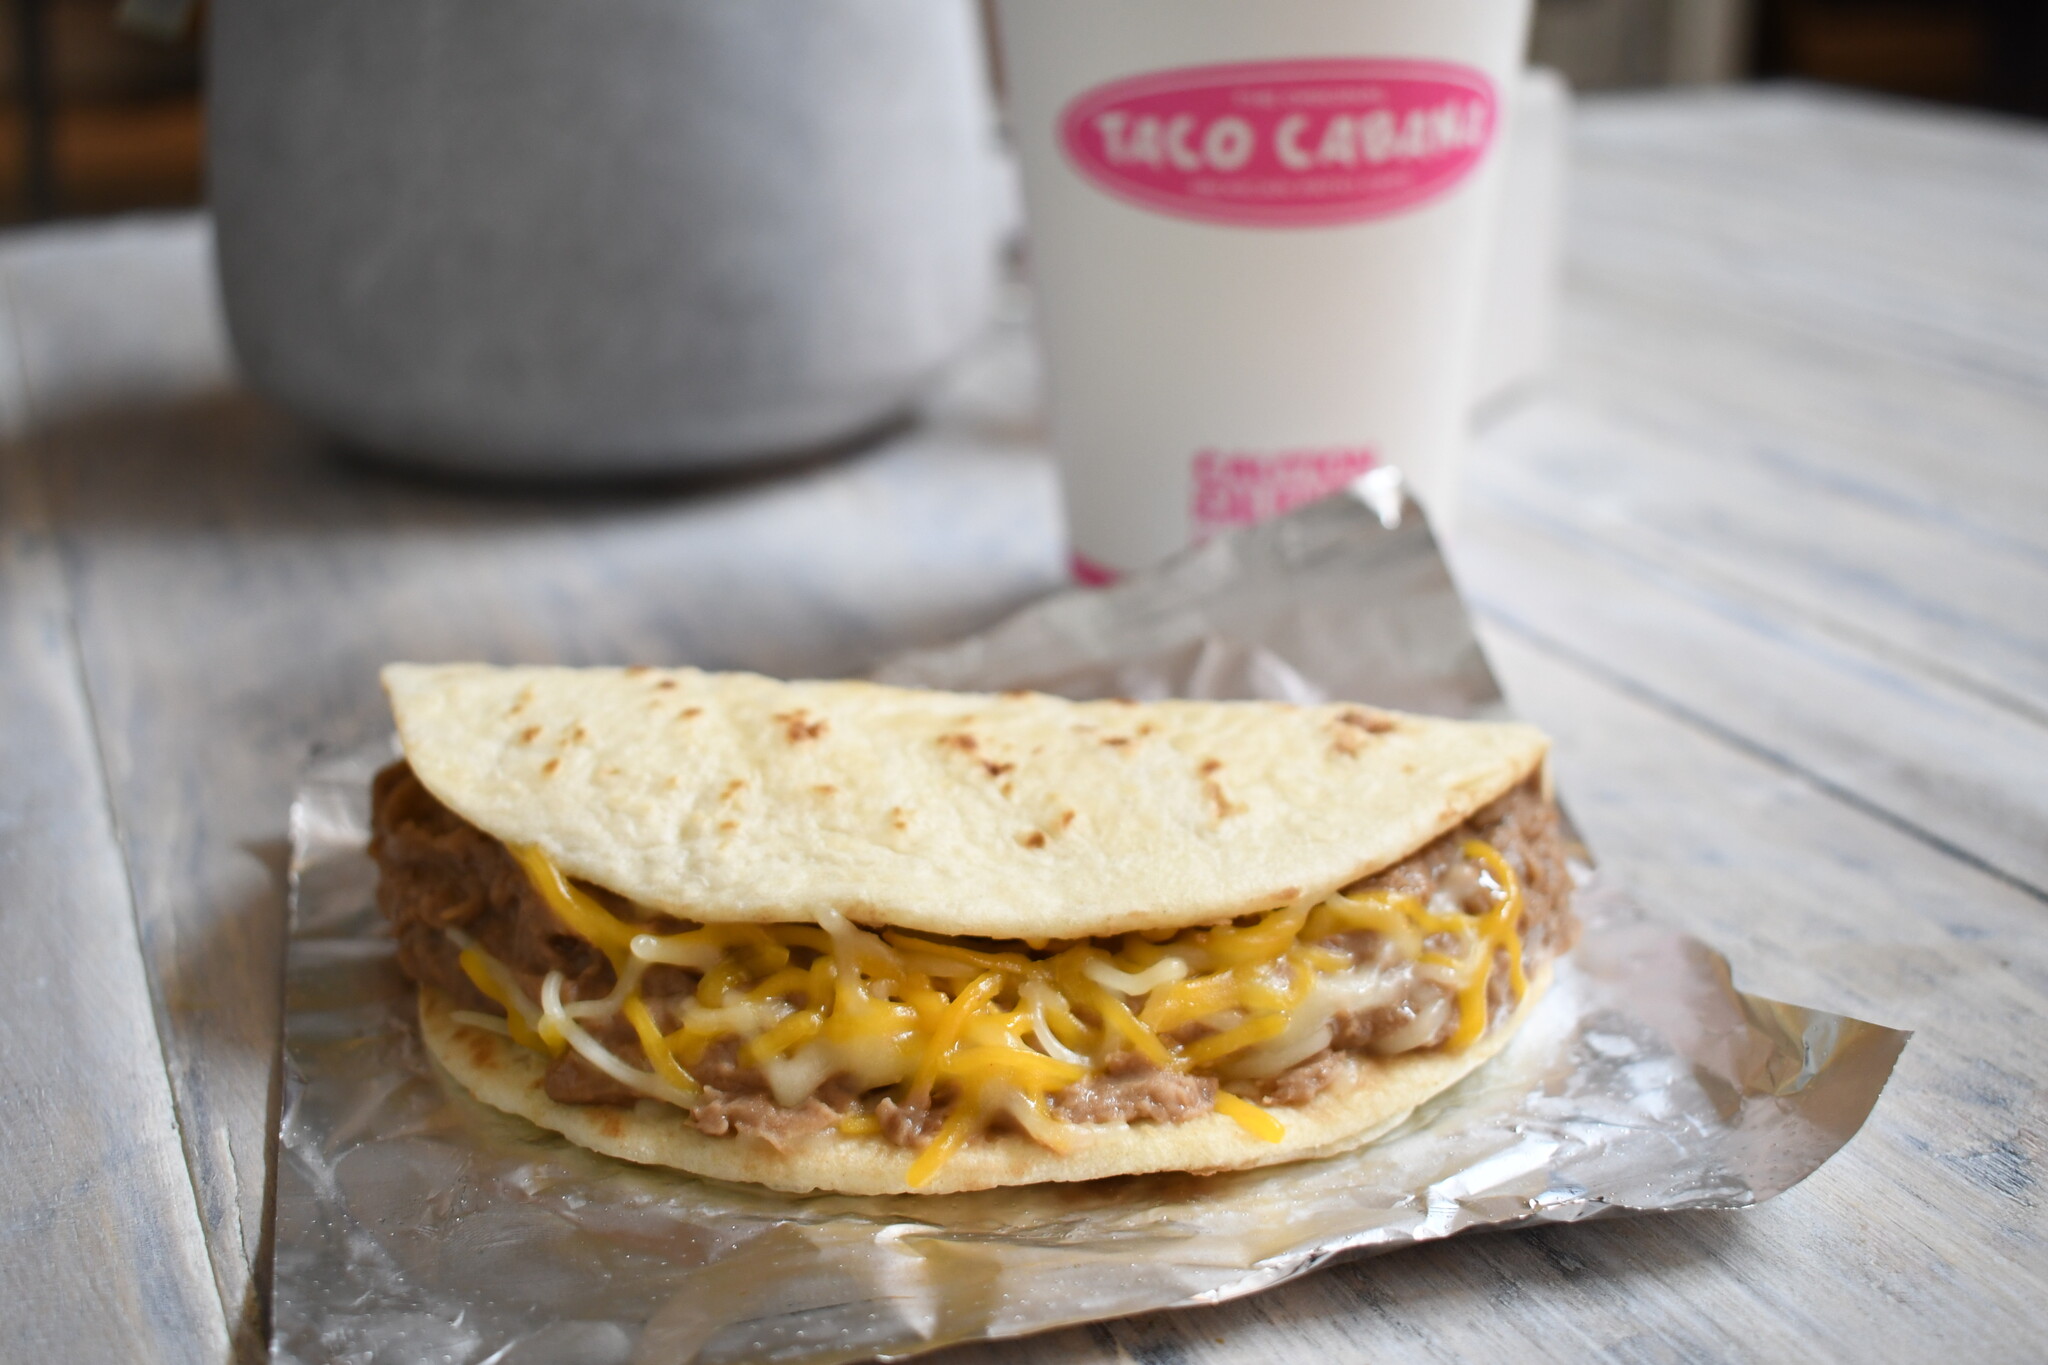 taco-cabana-is-offering-1-tacos-for-national-taco-day